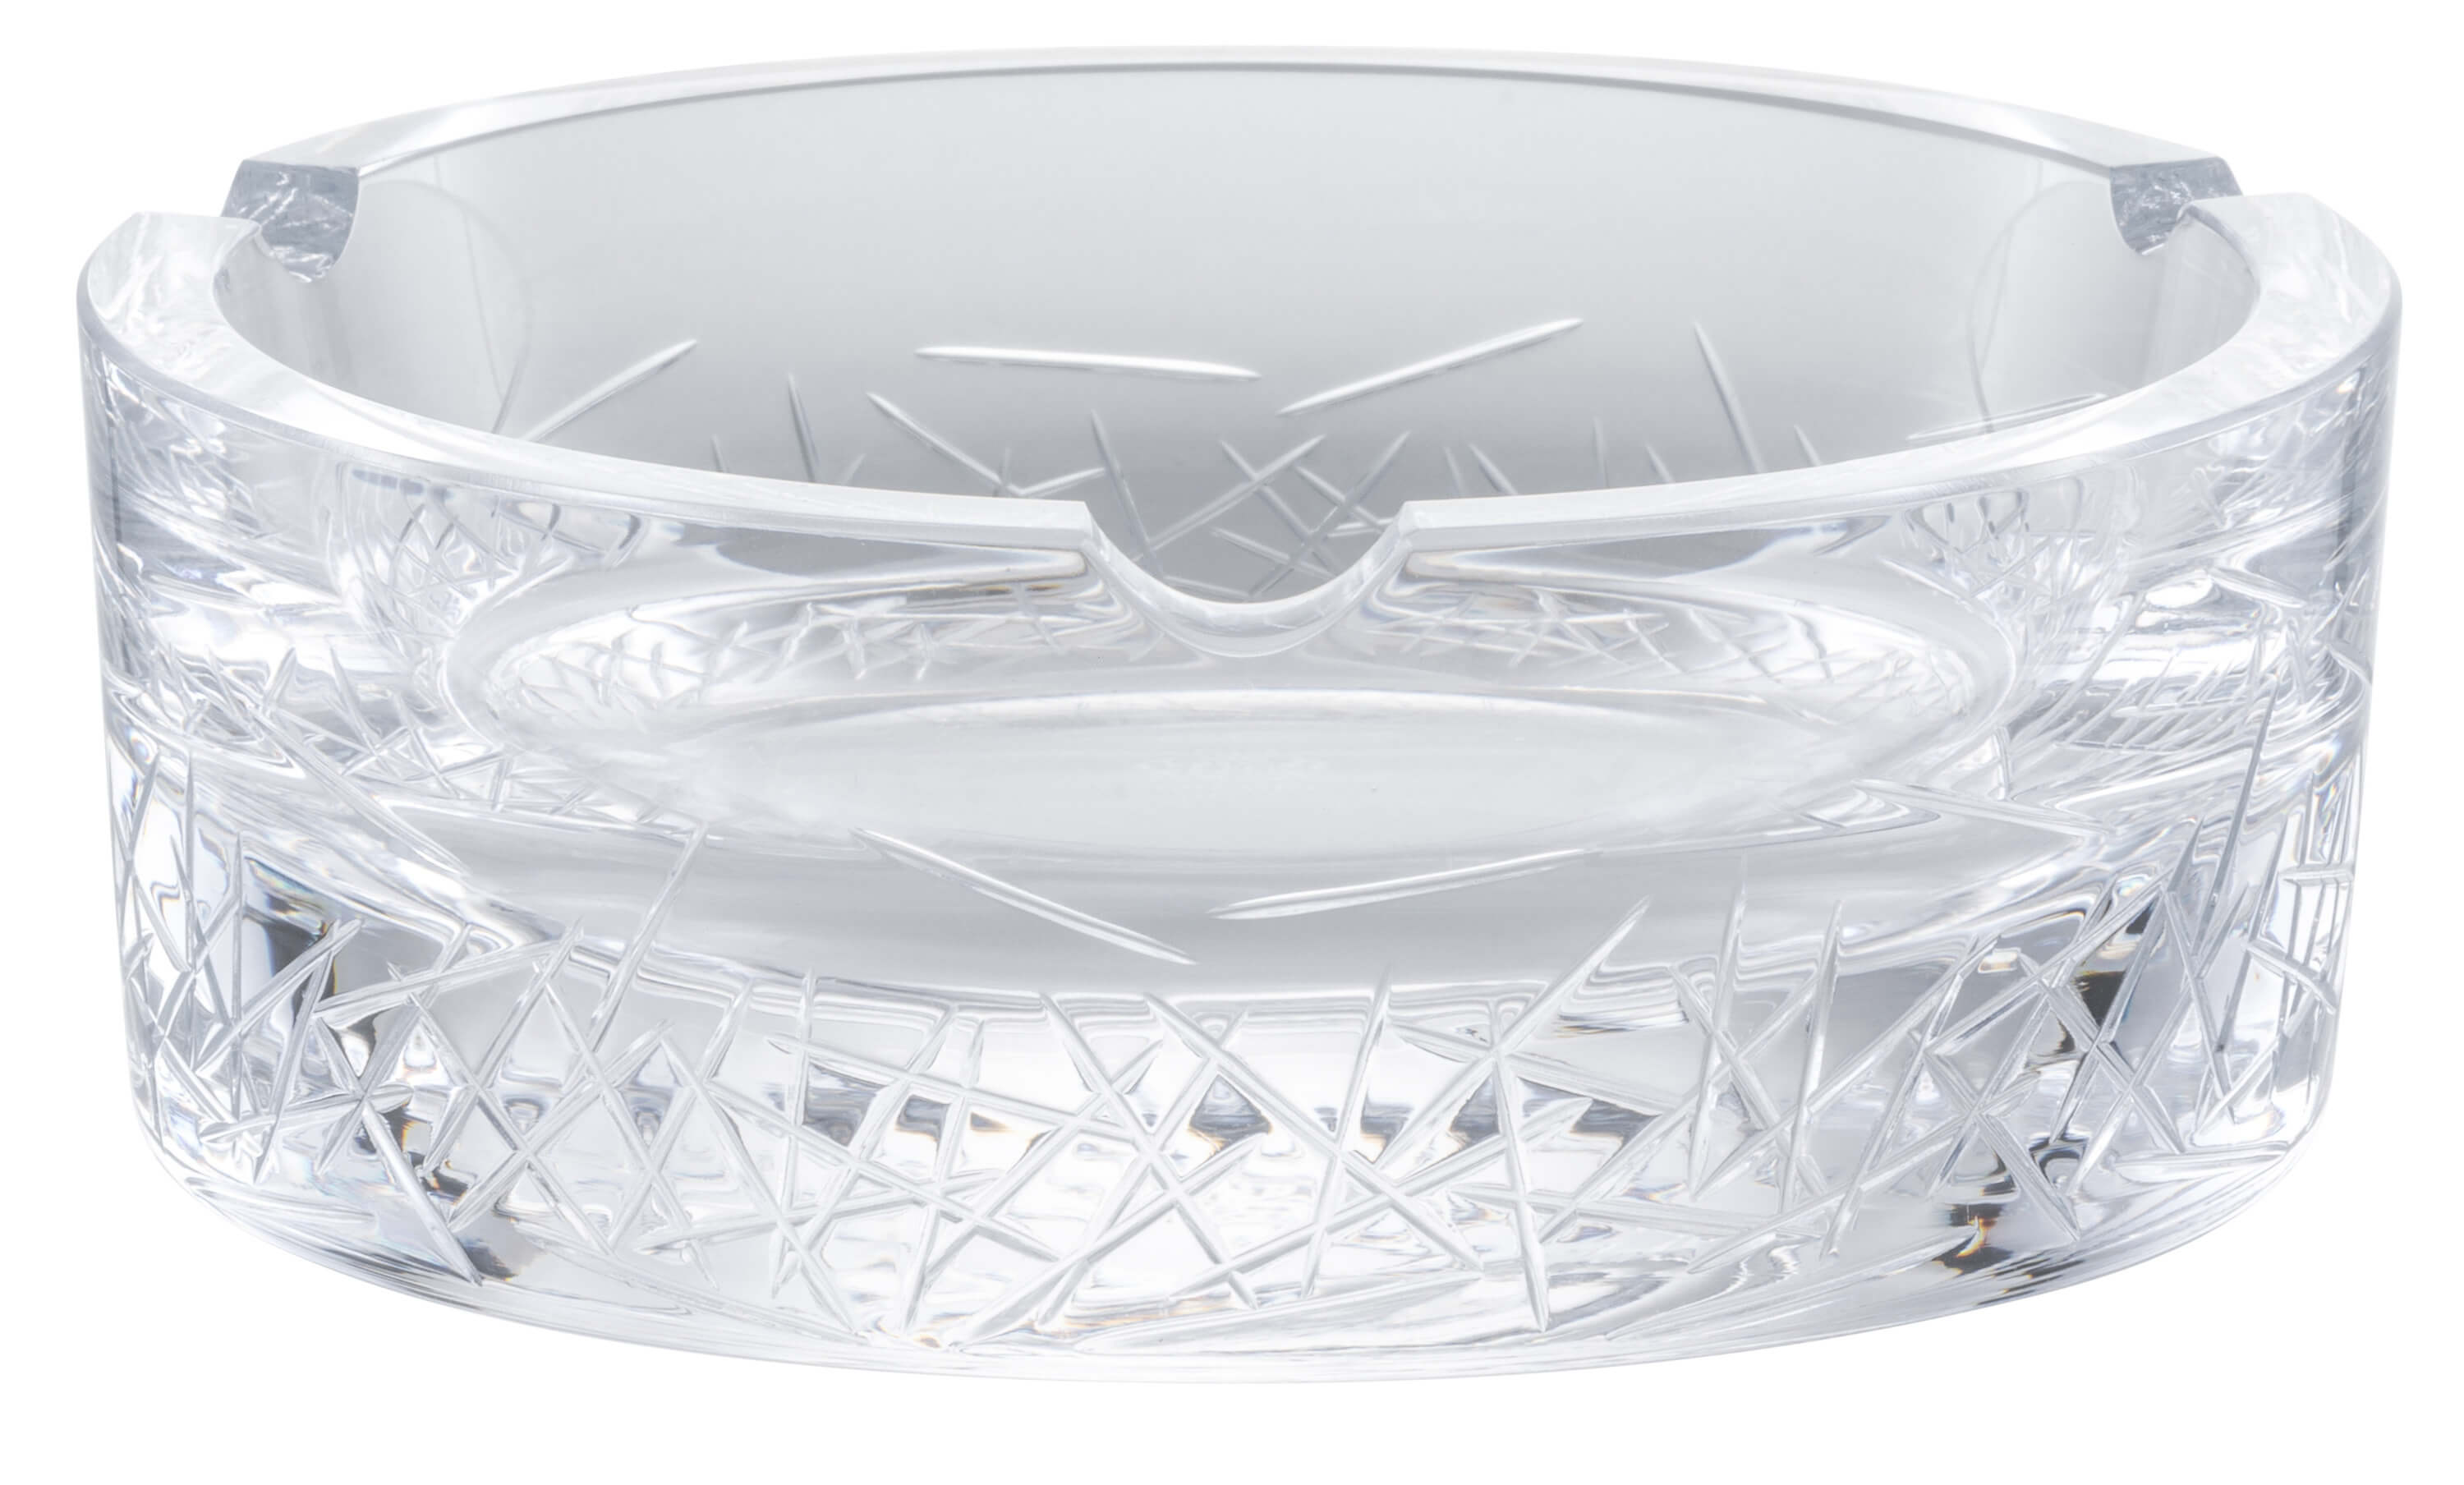 Ashtray Hommage Glace, Zwiesel Glas - 147mm (1 pc.)